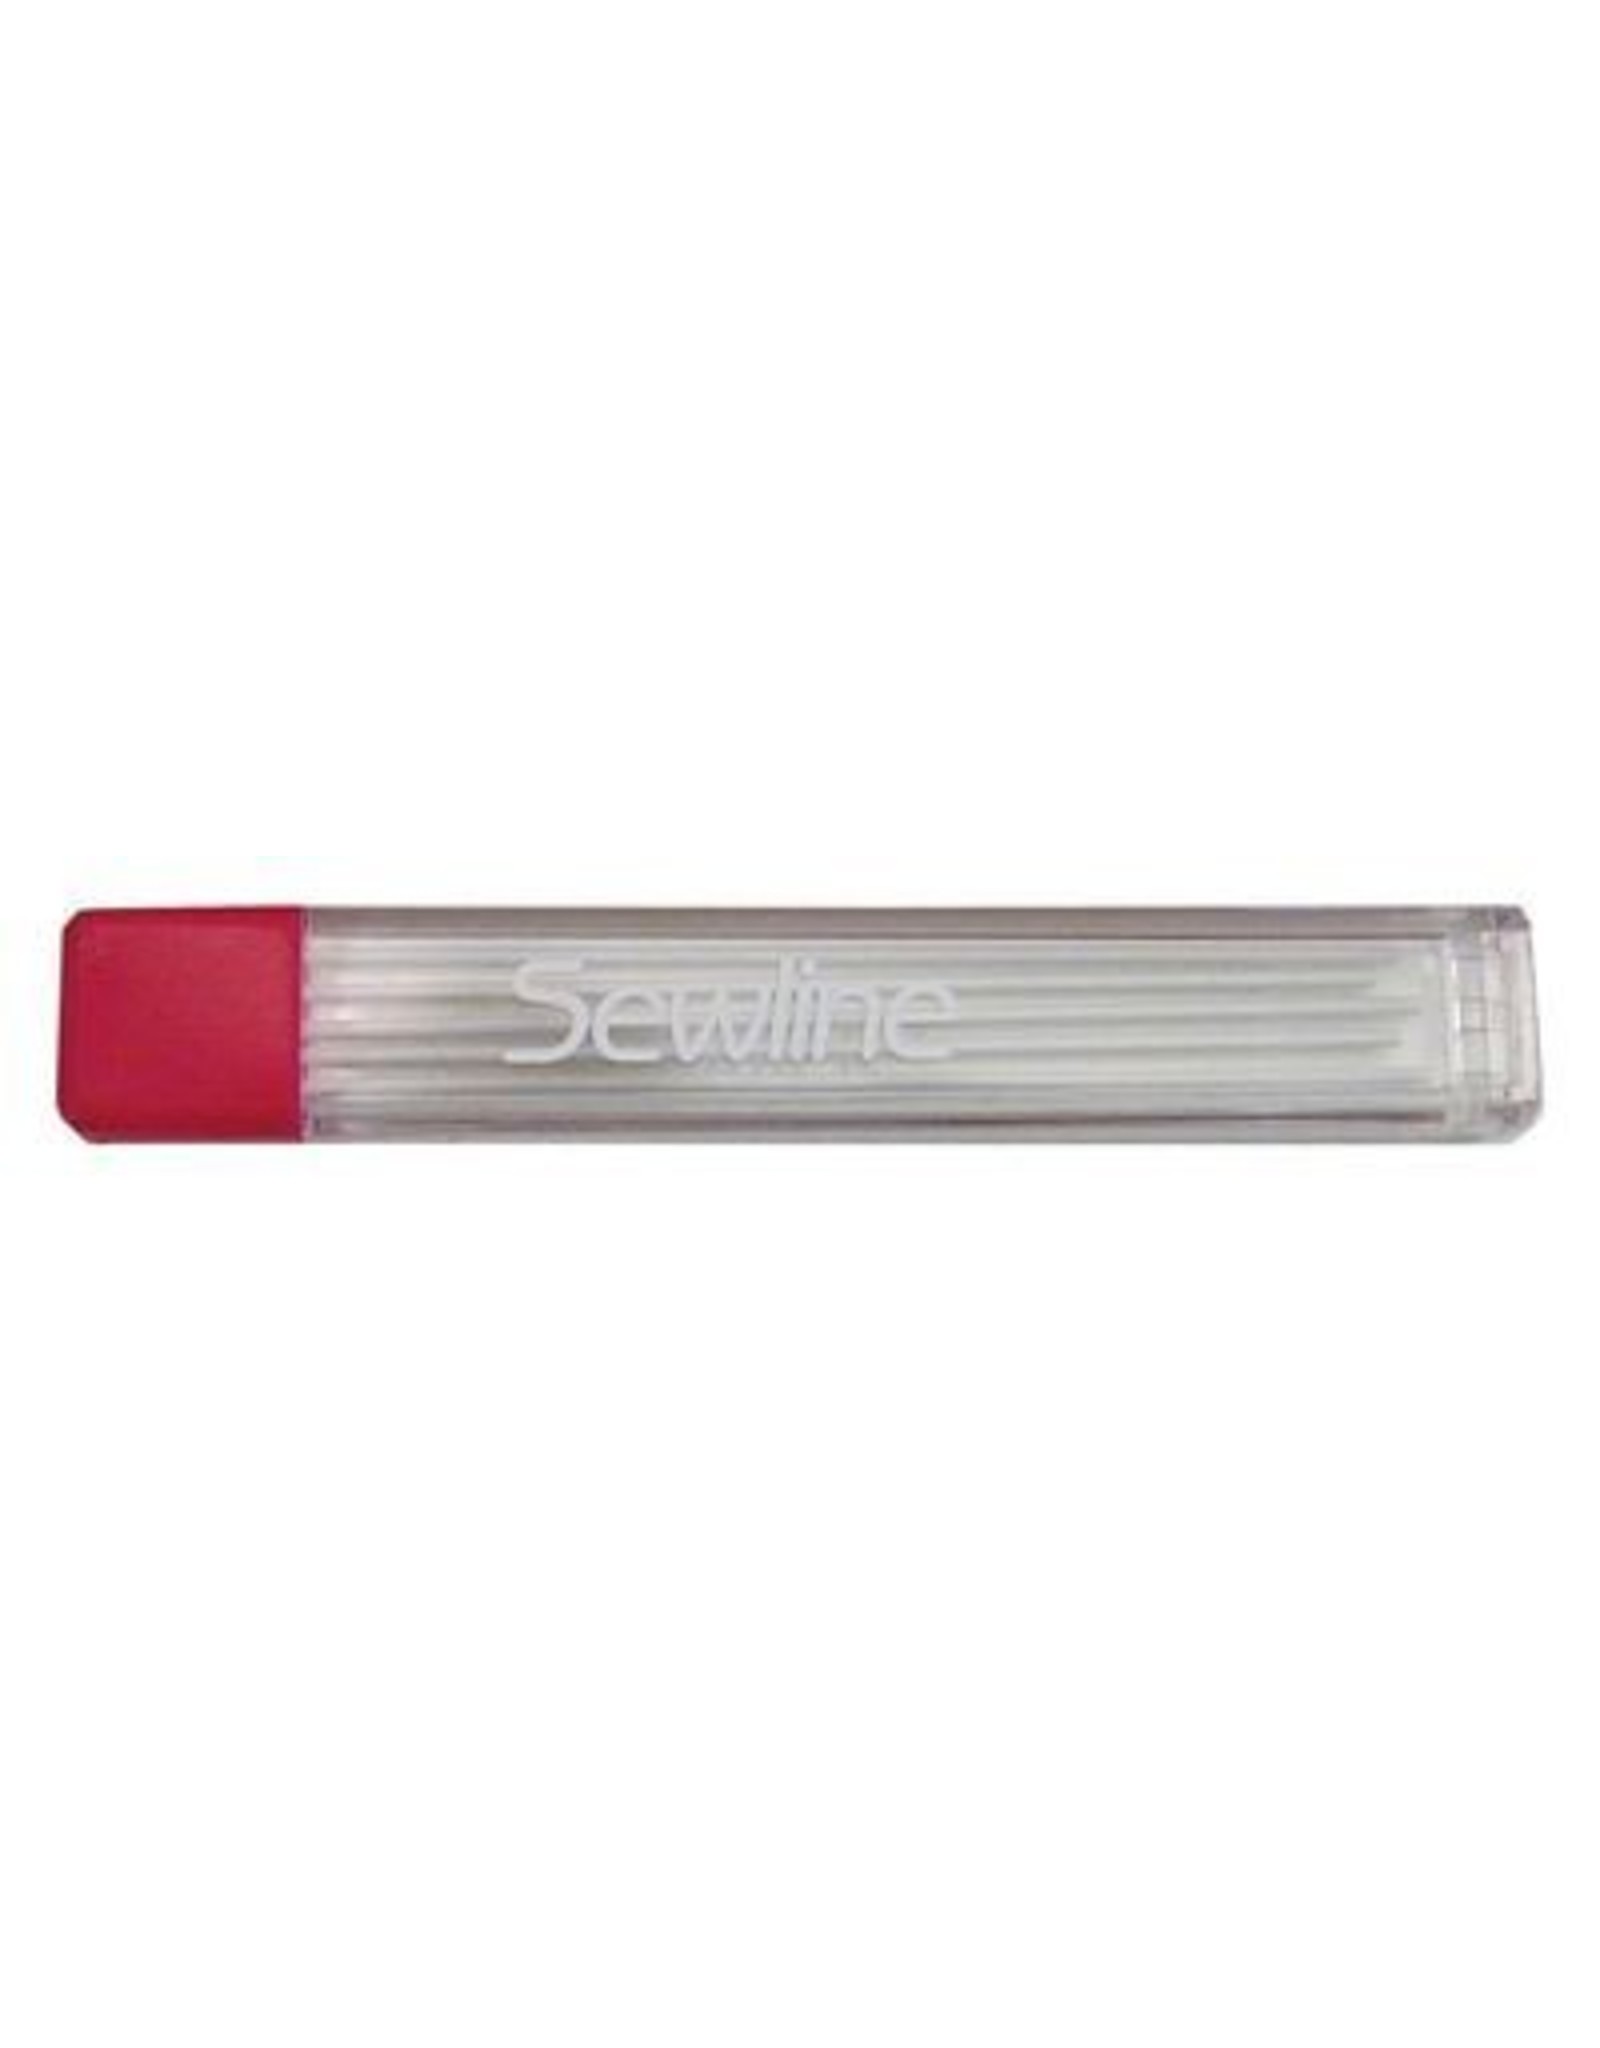 Sewline Fabric Pencil Refill wit